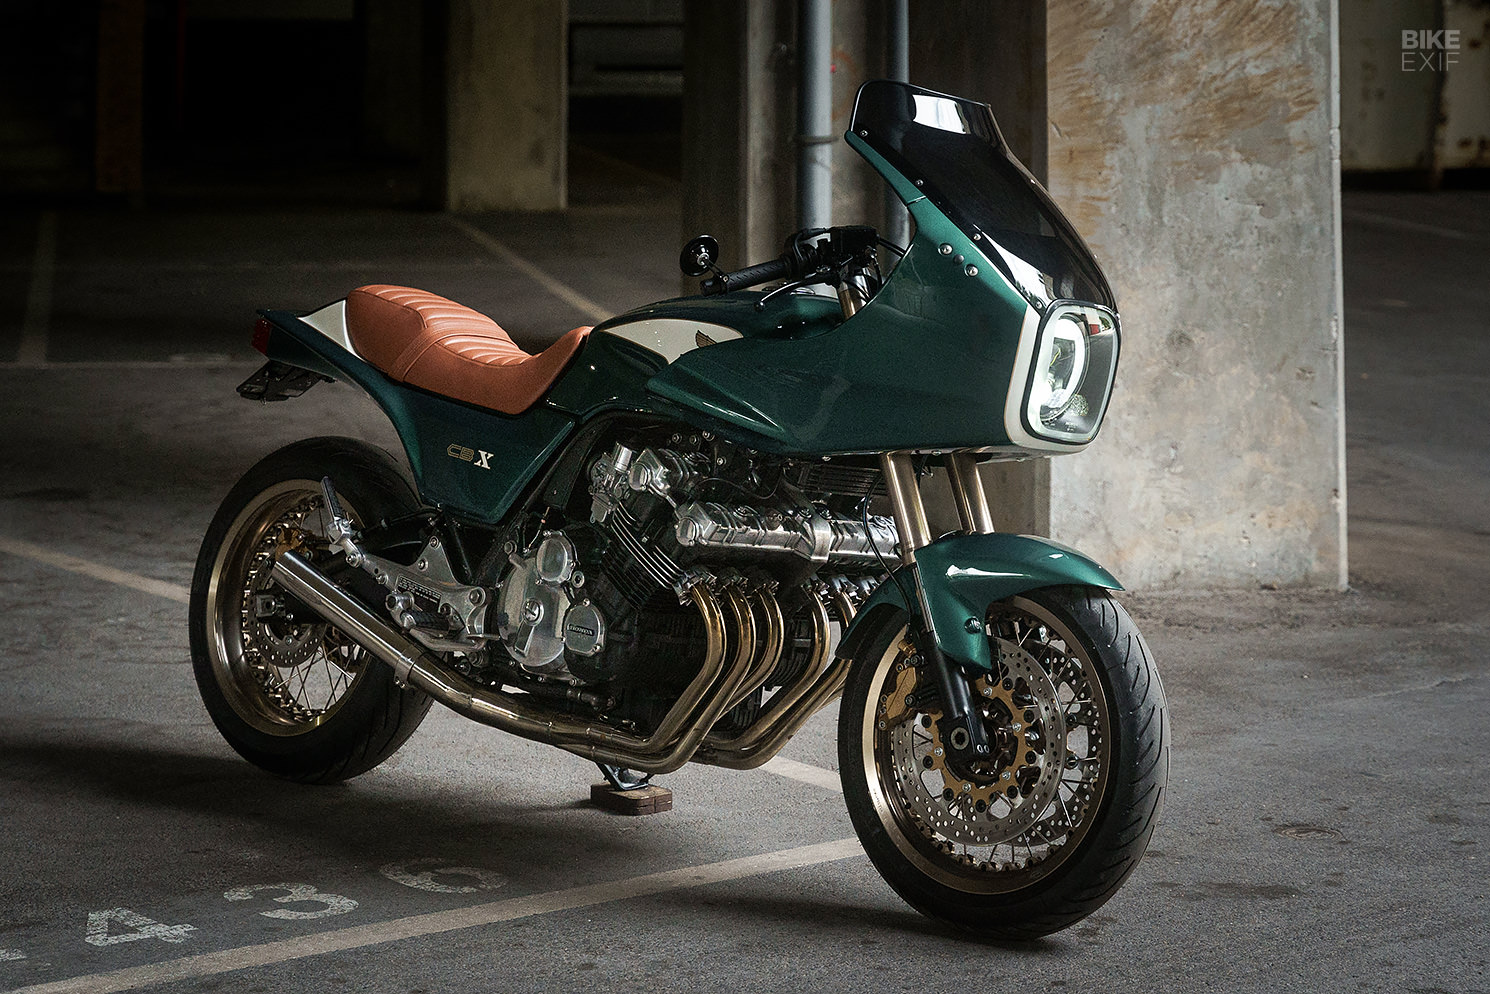 The Honda CBX 1000 Was an 80s 6-Cylinder Superbike